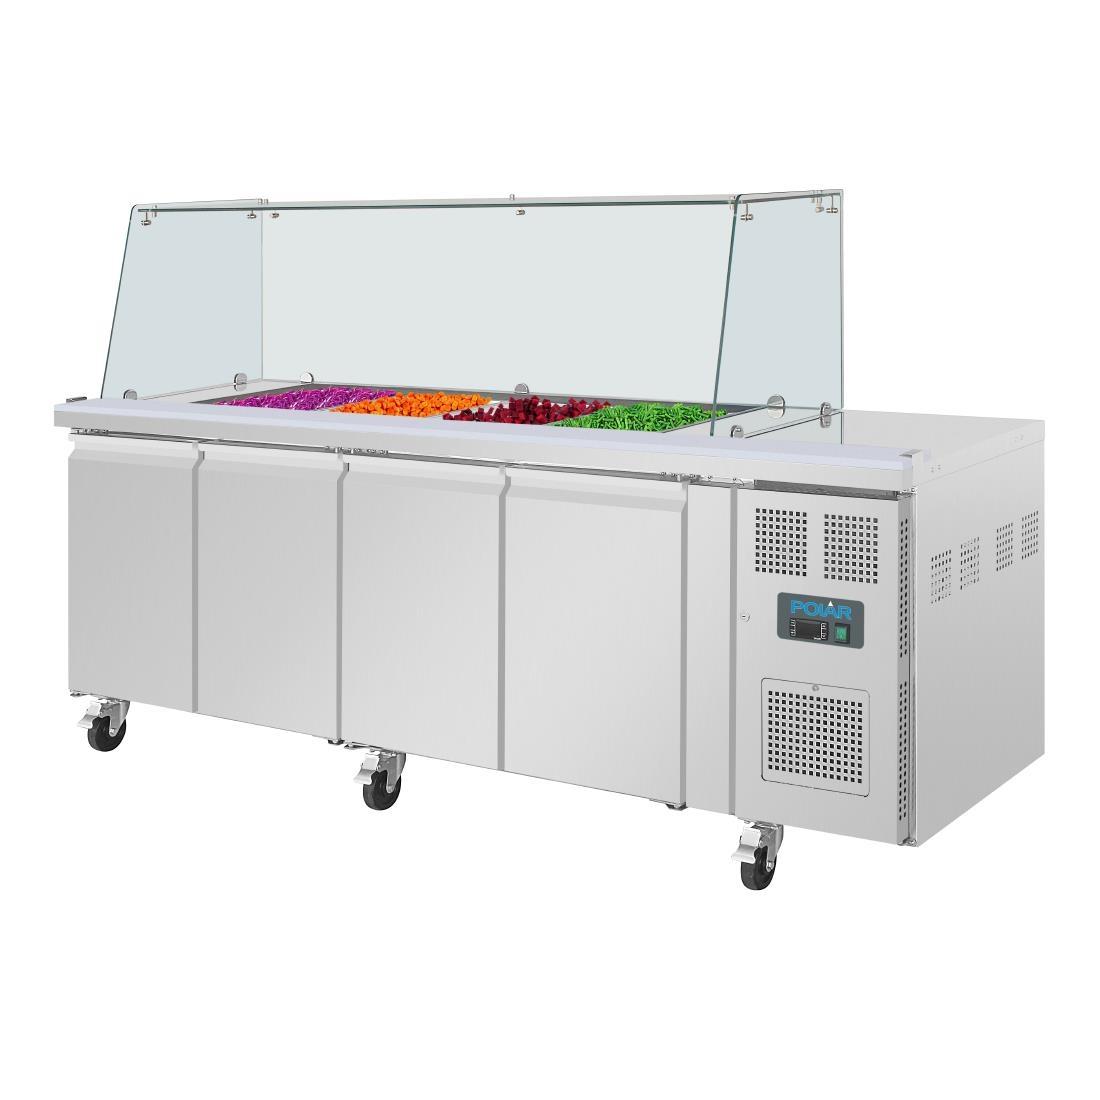 Polar U-Series GN Saladette Counter with Square Sneeze Guard 4 Door